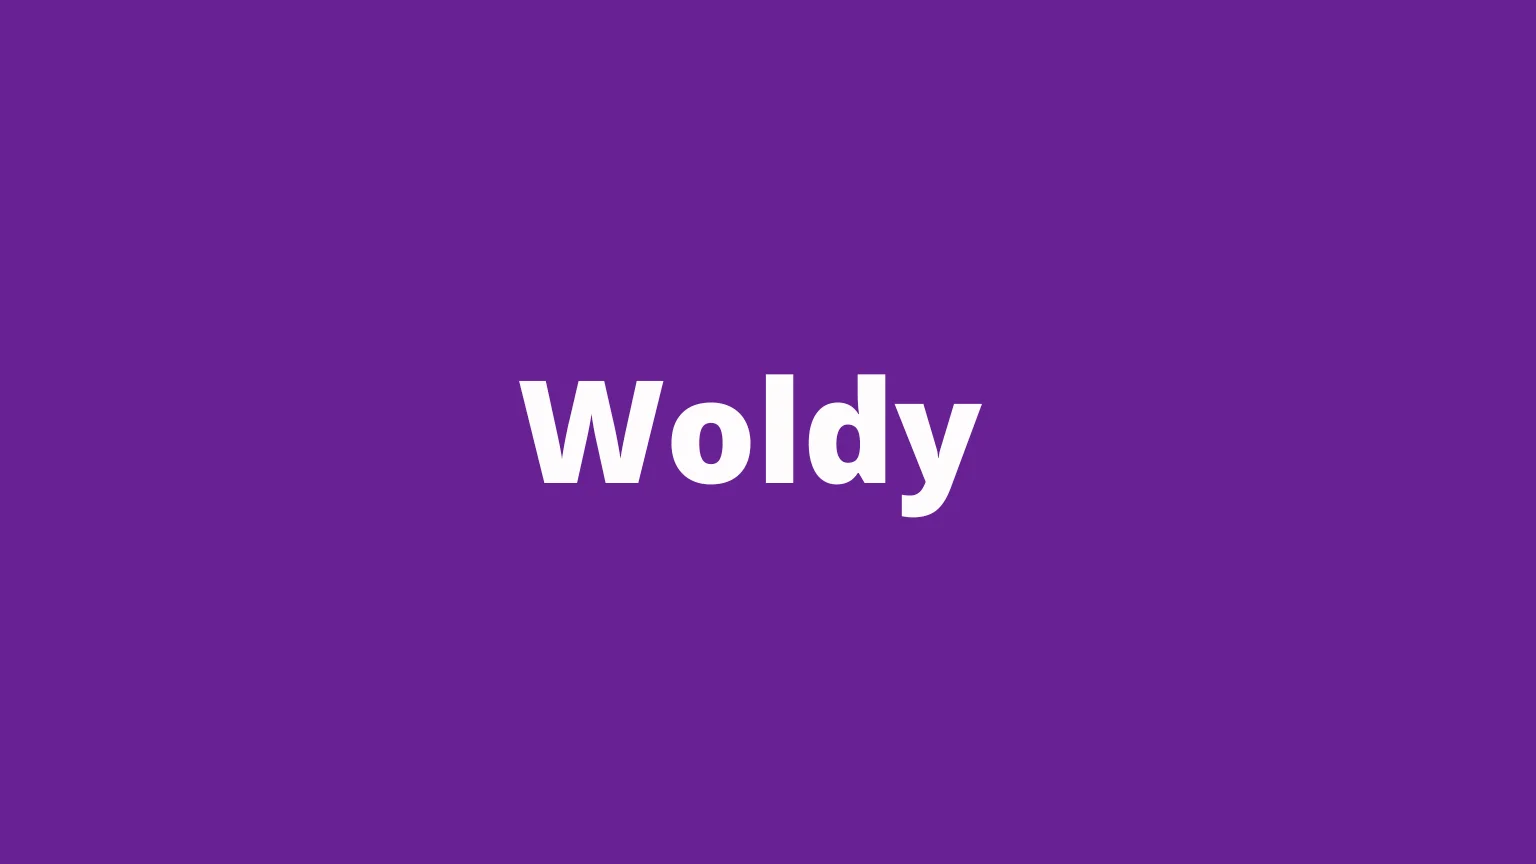 The word woldy and its meaning